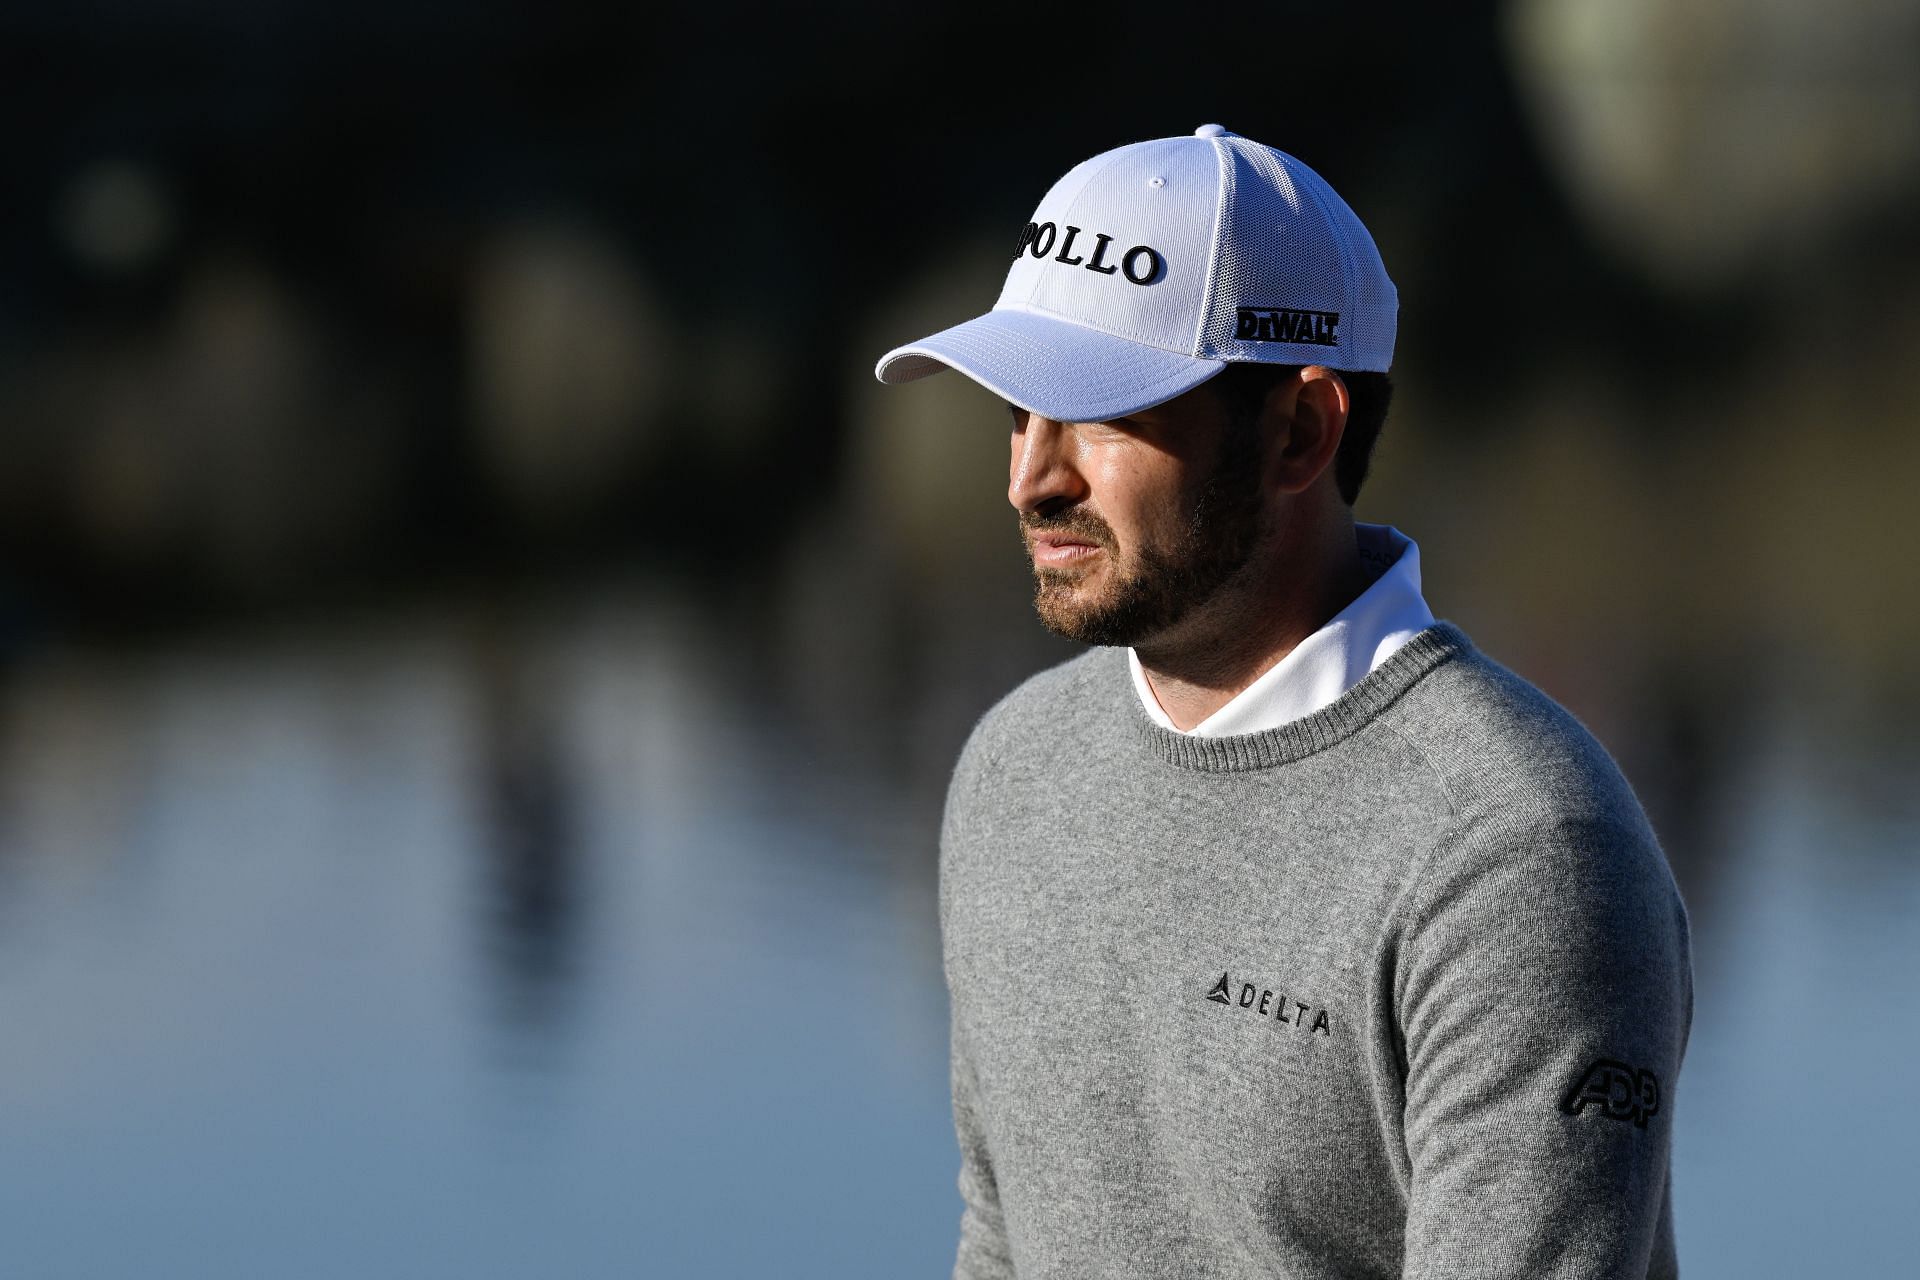 Patrick Cantlay will make his return to Torrey Pines for the first time in five years